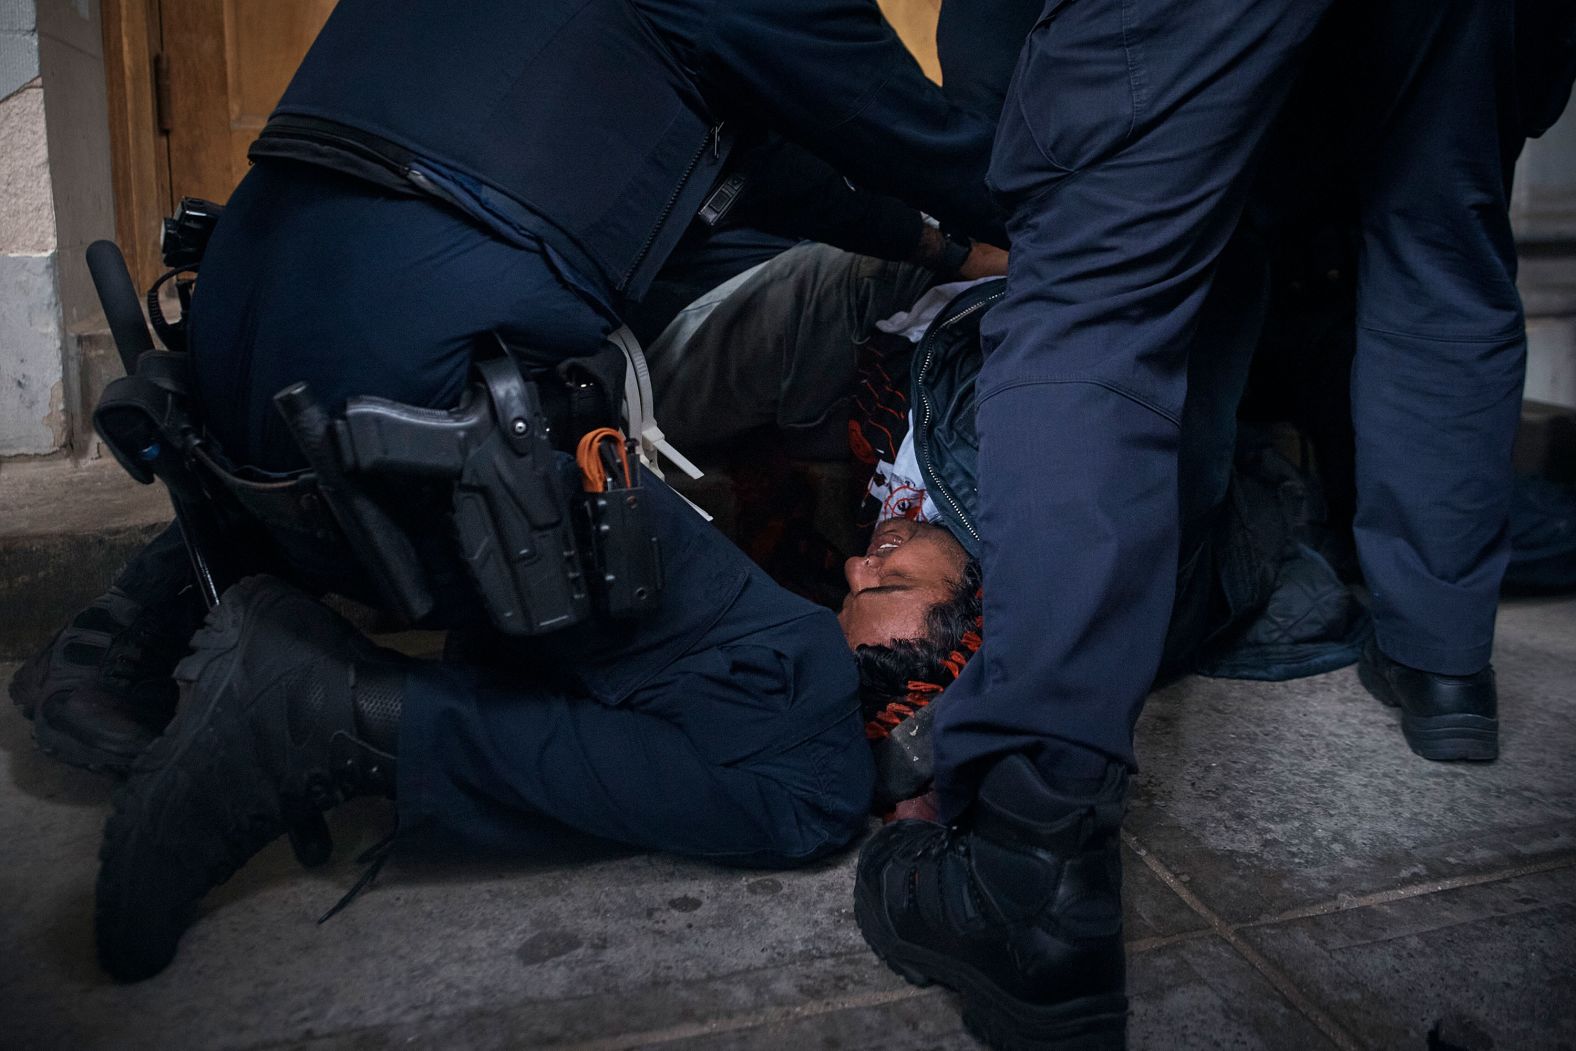 Police detain a protester near the Metropolitan Museum of Art in New York, where the Met Gala was taking place on Monday, May 6.